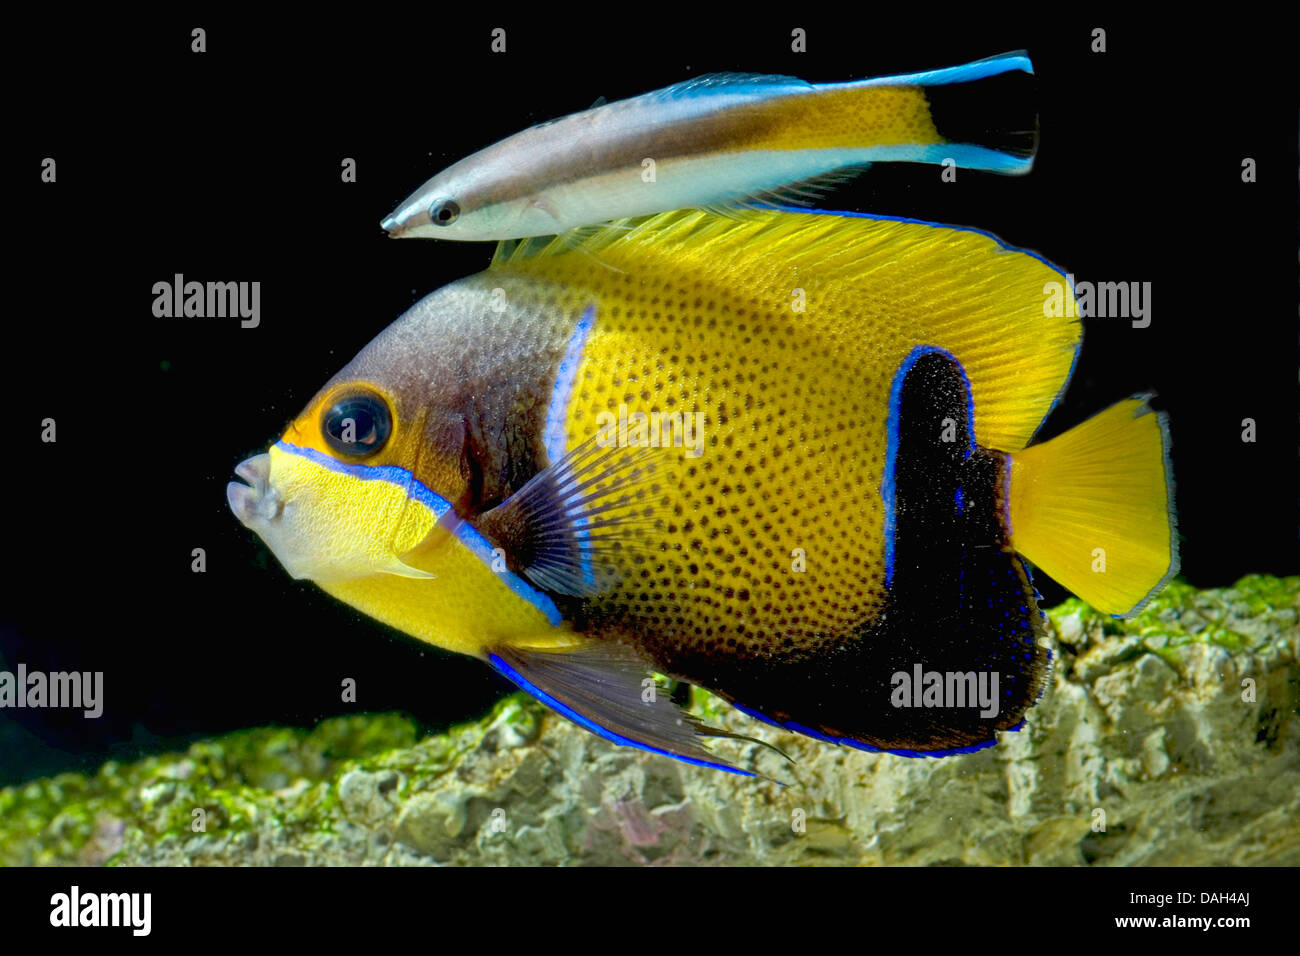 blue-girdled angelfish, majestic anglefish (Euxiphipops navarchus, Pomacanthus navarchus), together with another coral fish Stock Photo